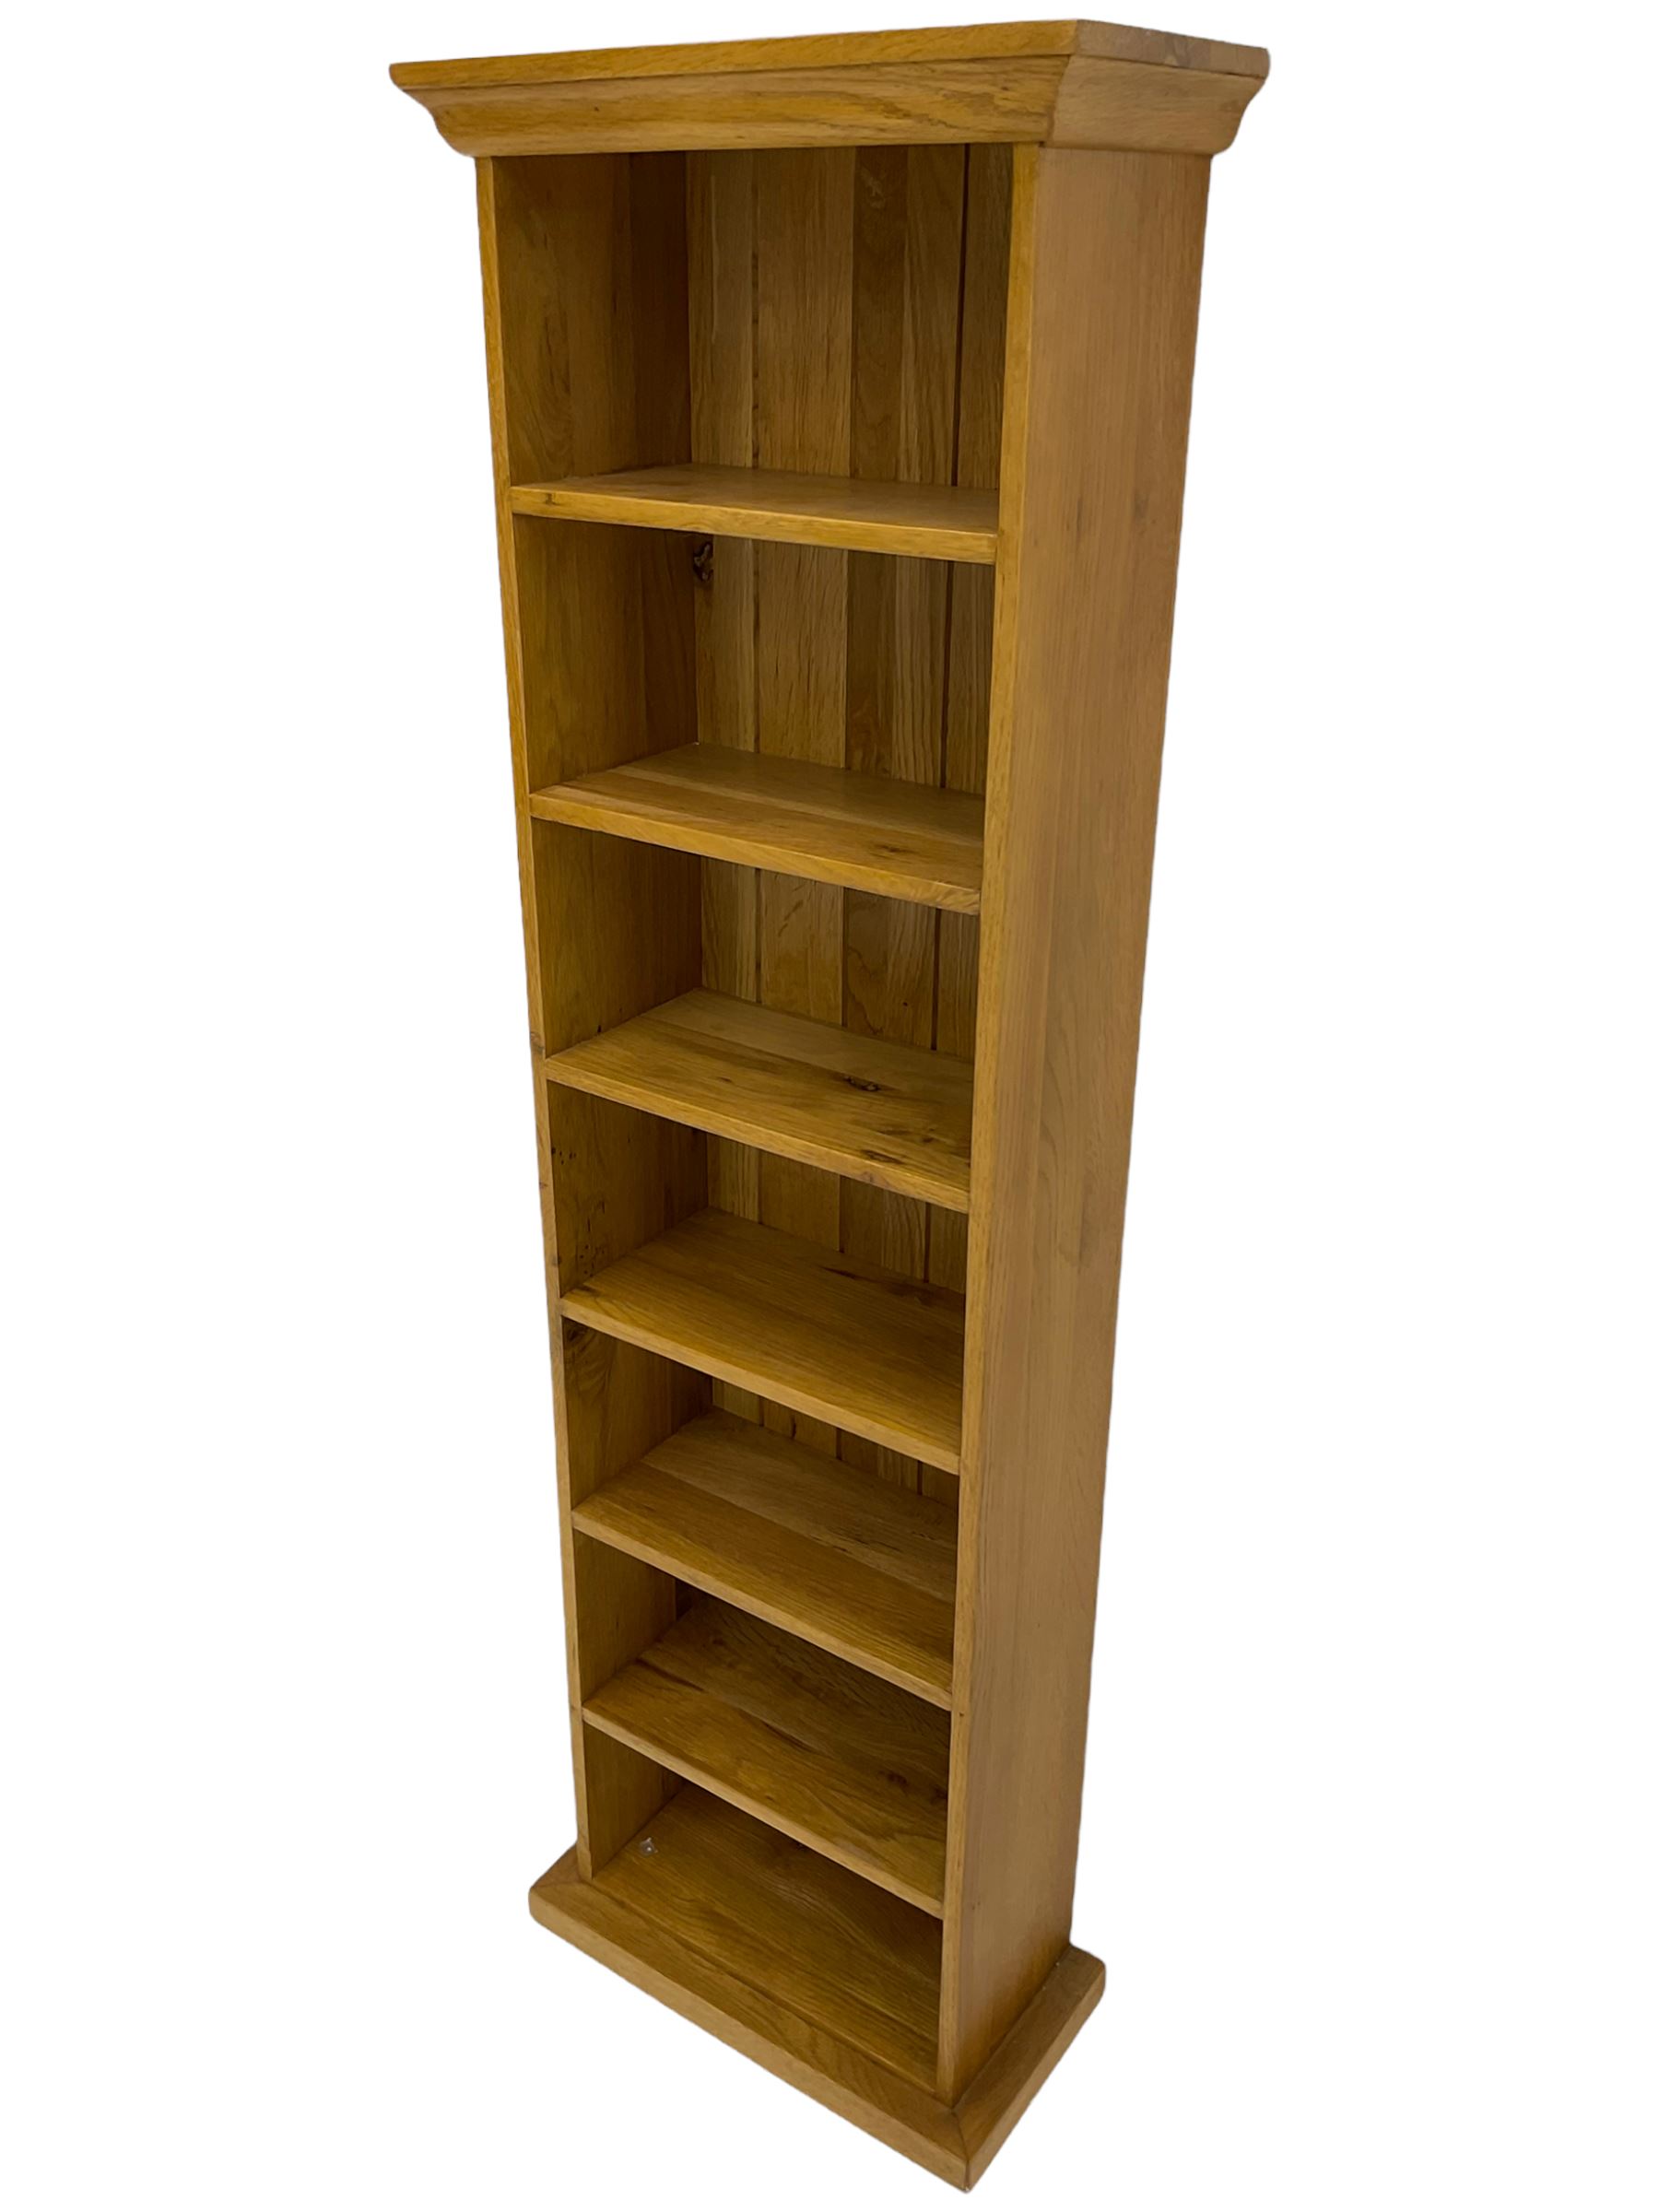 Small solid light oak open bookcase - Image 4 of 4